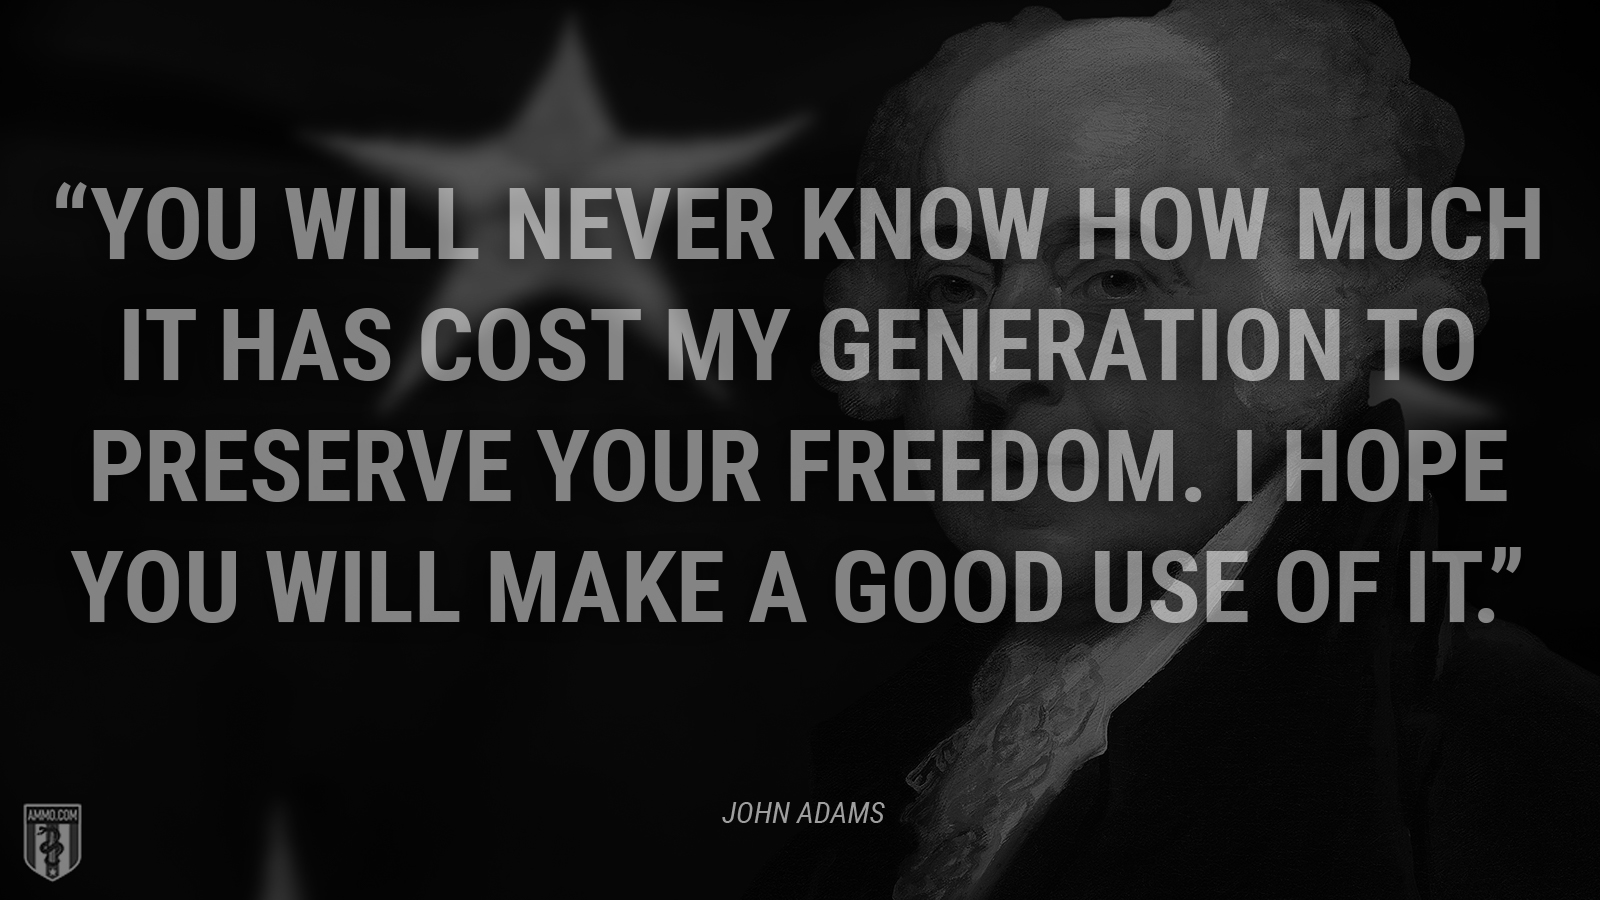 “You will never know how much it has cost my generation to preserve YOUR freedom. I hope you will make a good use of it.” - John Adams